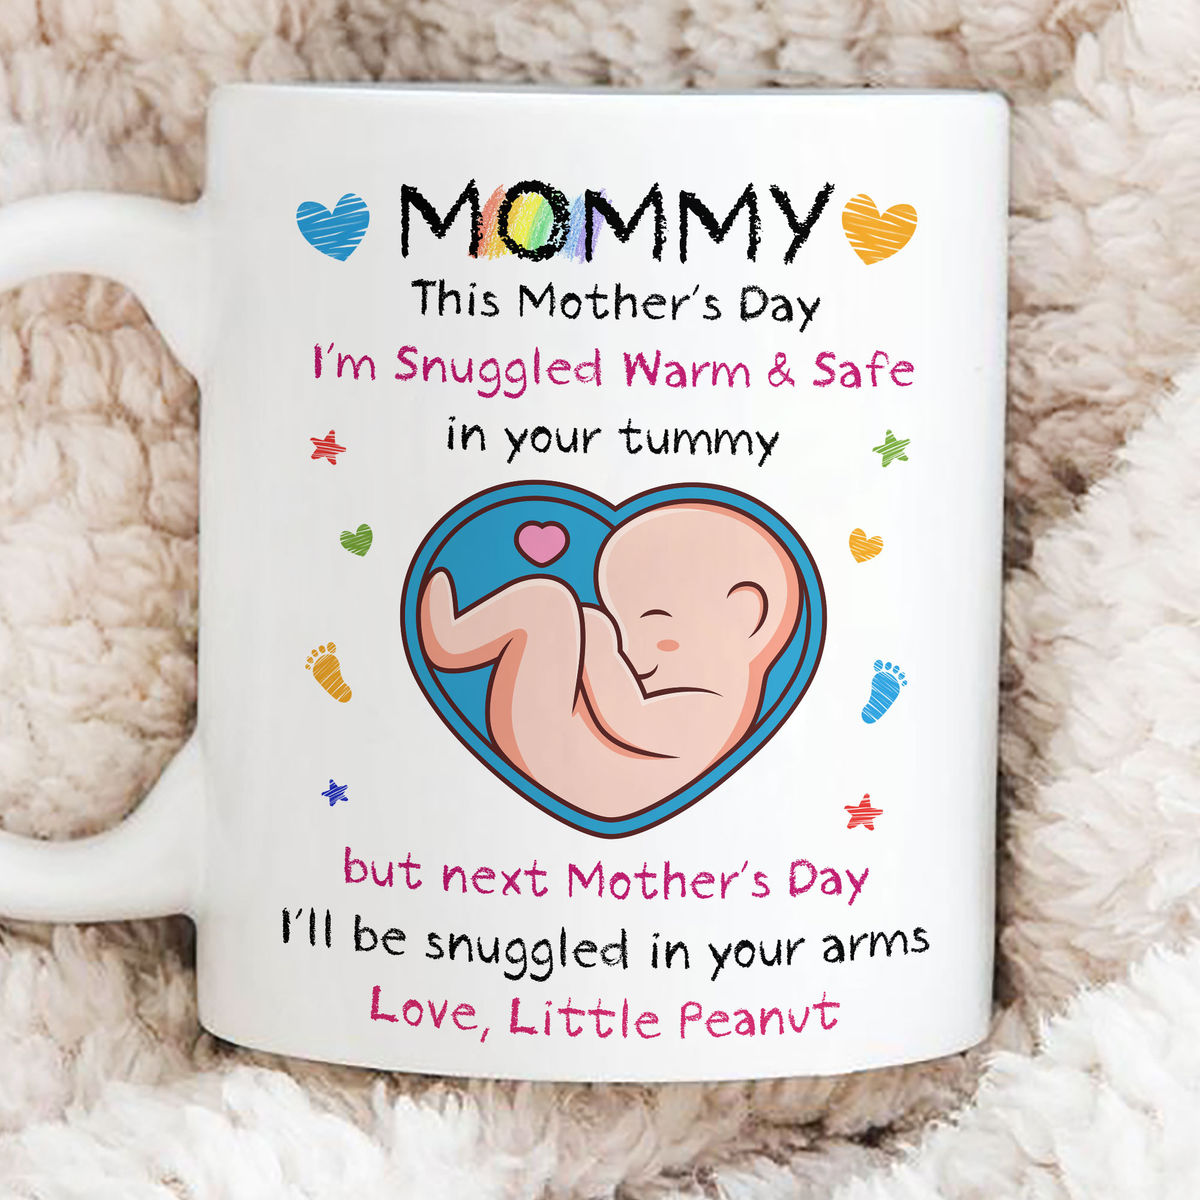 Personalized Mug - From The Bump - Mommy, This Mother's Day I'm Snuggled Warm & Safe In Your Tummy. But next Mother's Day, I'll be Snuggled in your arms (v2)_3